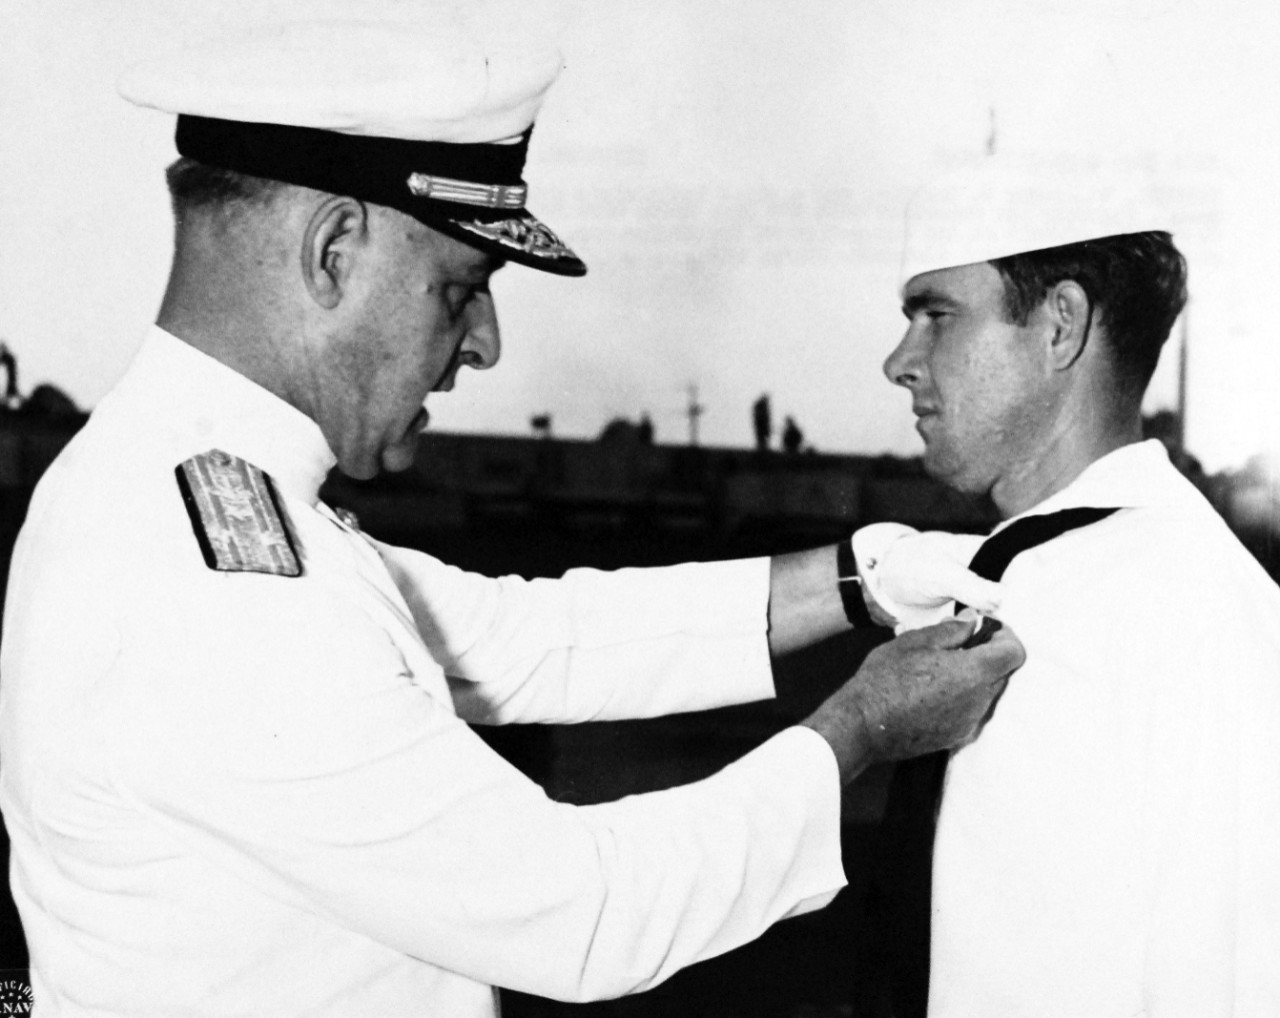 80-G-42771:  Boatswain’s Mate  First Class Roy B. Dowling, USN, Navy Cross.    Naval Operating Base, Norfolk, Virginia, Roy B. Dowling, now a Chief Boatswain’s Mate, USNR, is decorated with the Navy Cross for his actions in the assault on and occupation of French Morocco.  The decoration is pinned on him by Vice Admiral Alexander Sharp, USN, Commander, Service Force, U.S. Atlantic Force.    Released August 21, 1943.  Official U.S. Navy Photograph, now in the collections of the National Archives.   (2017/08/01).  